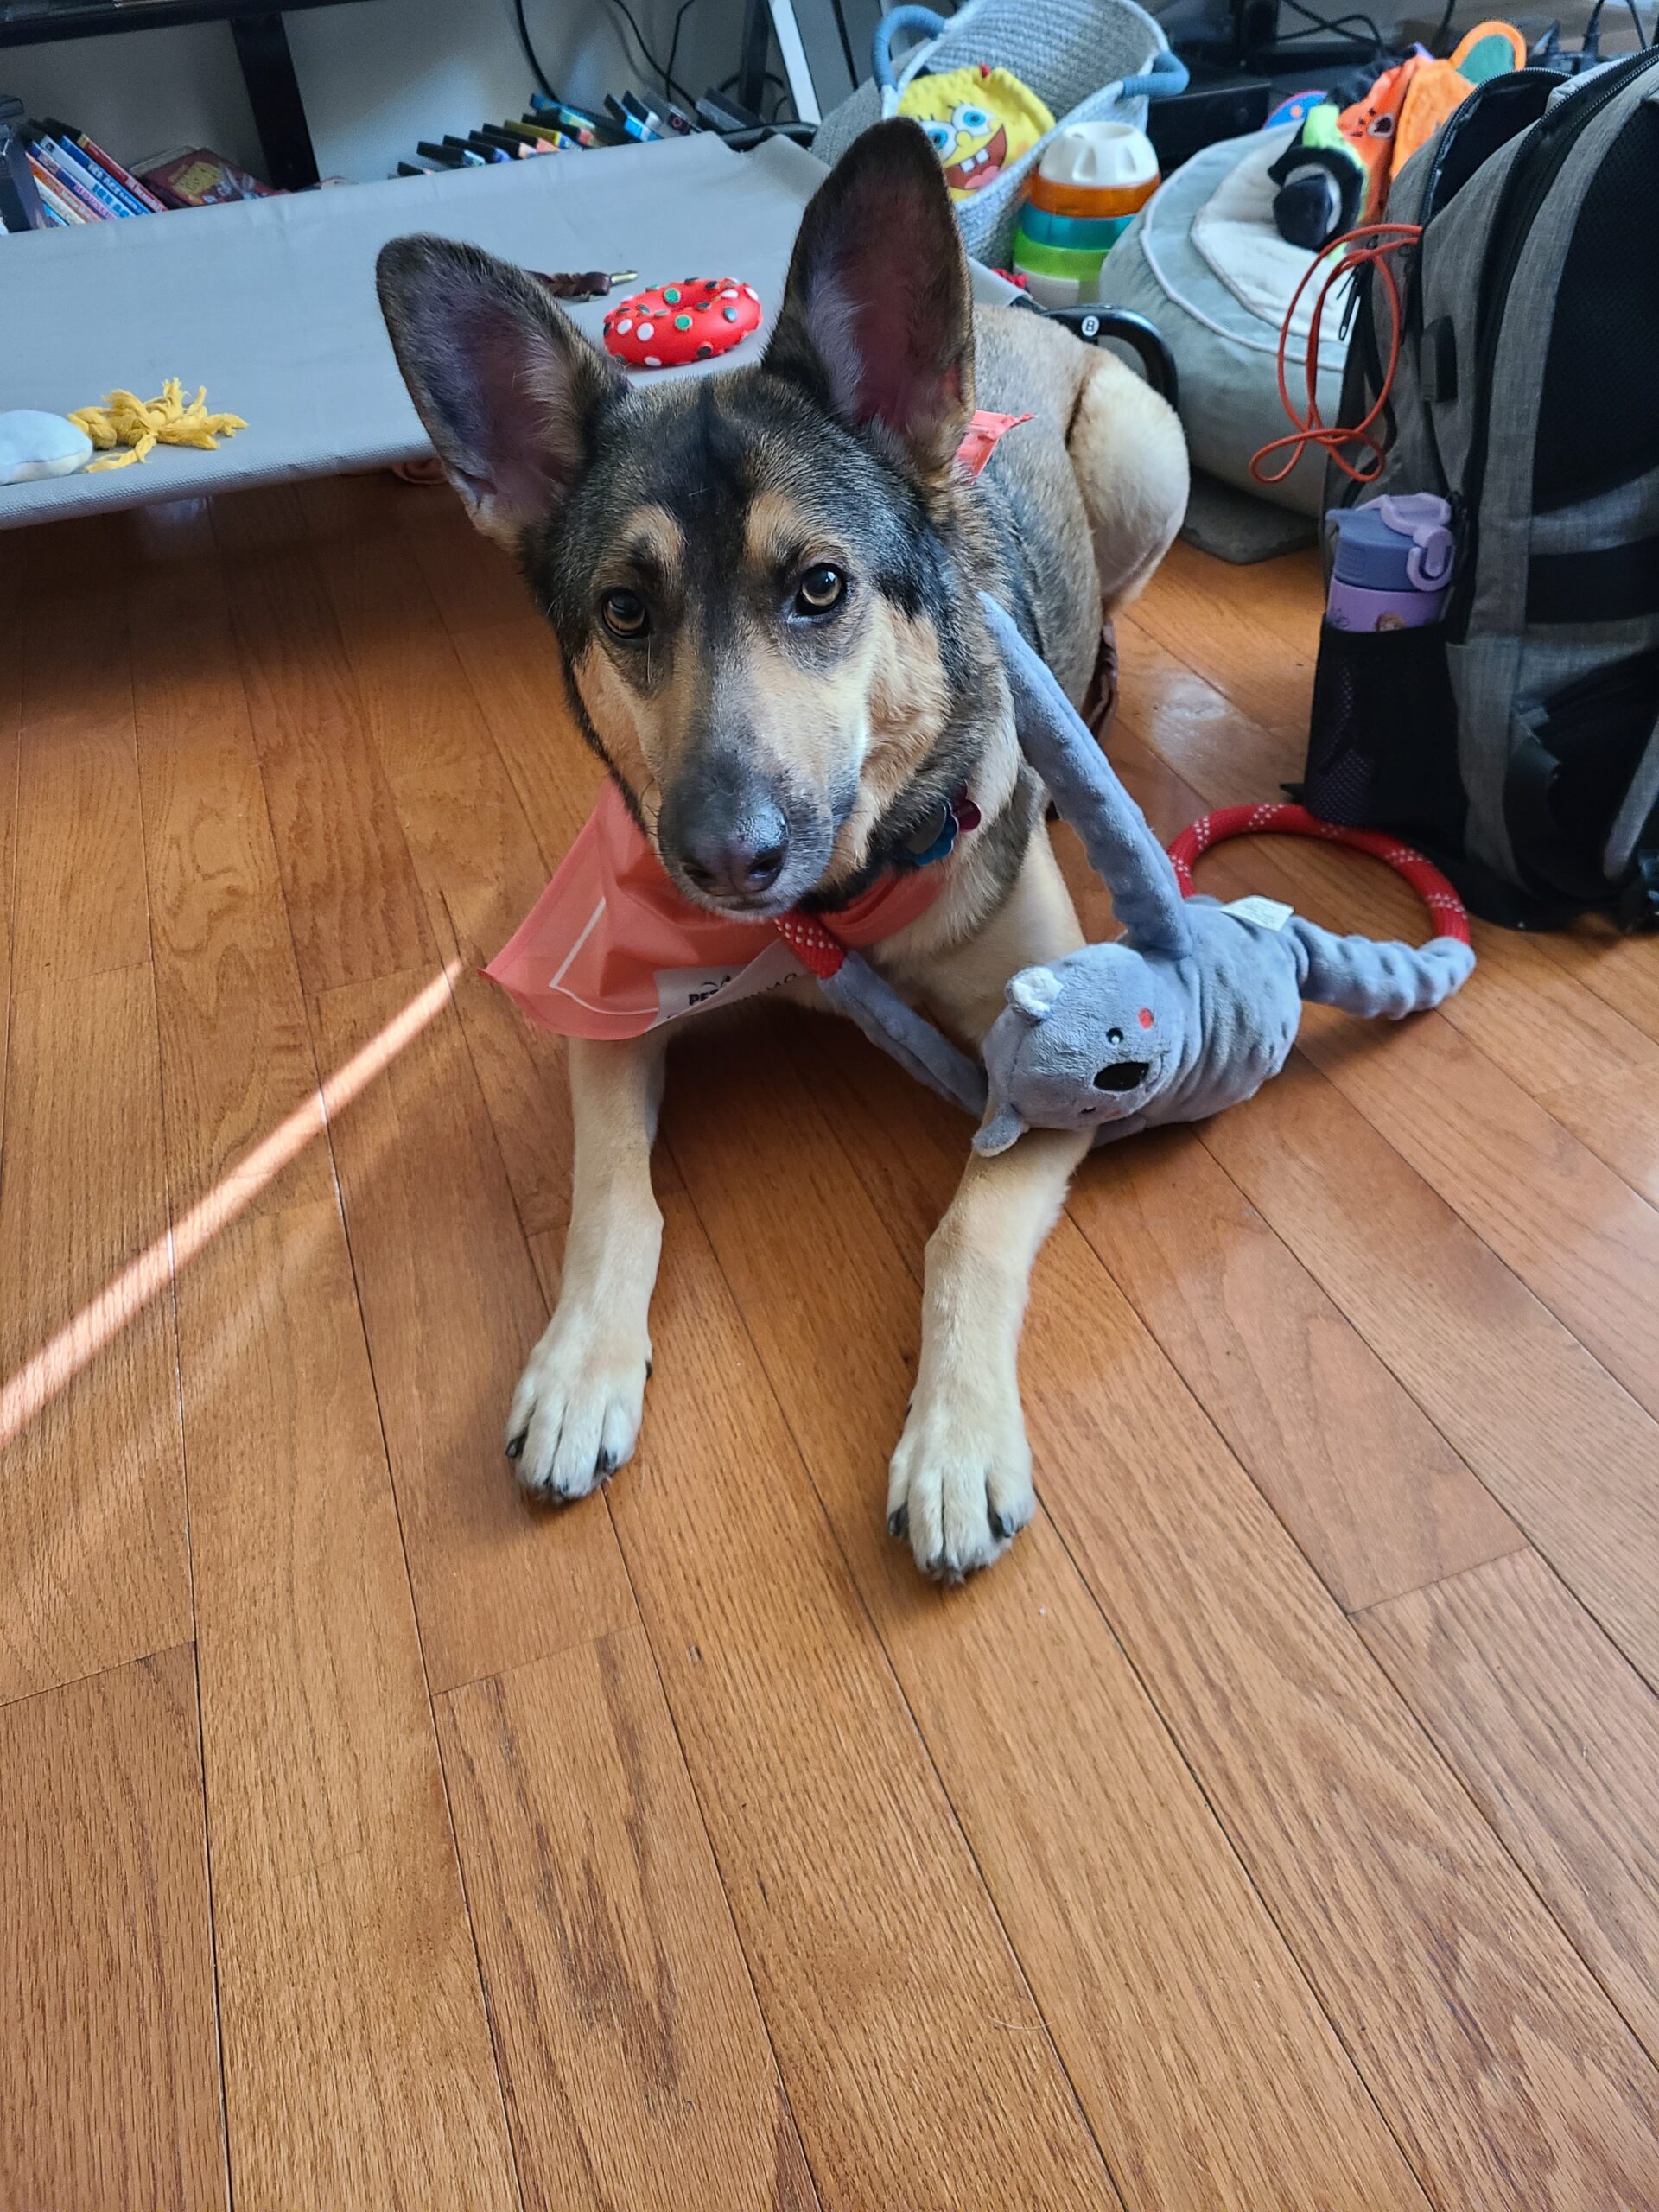 tilly service dog in training